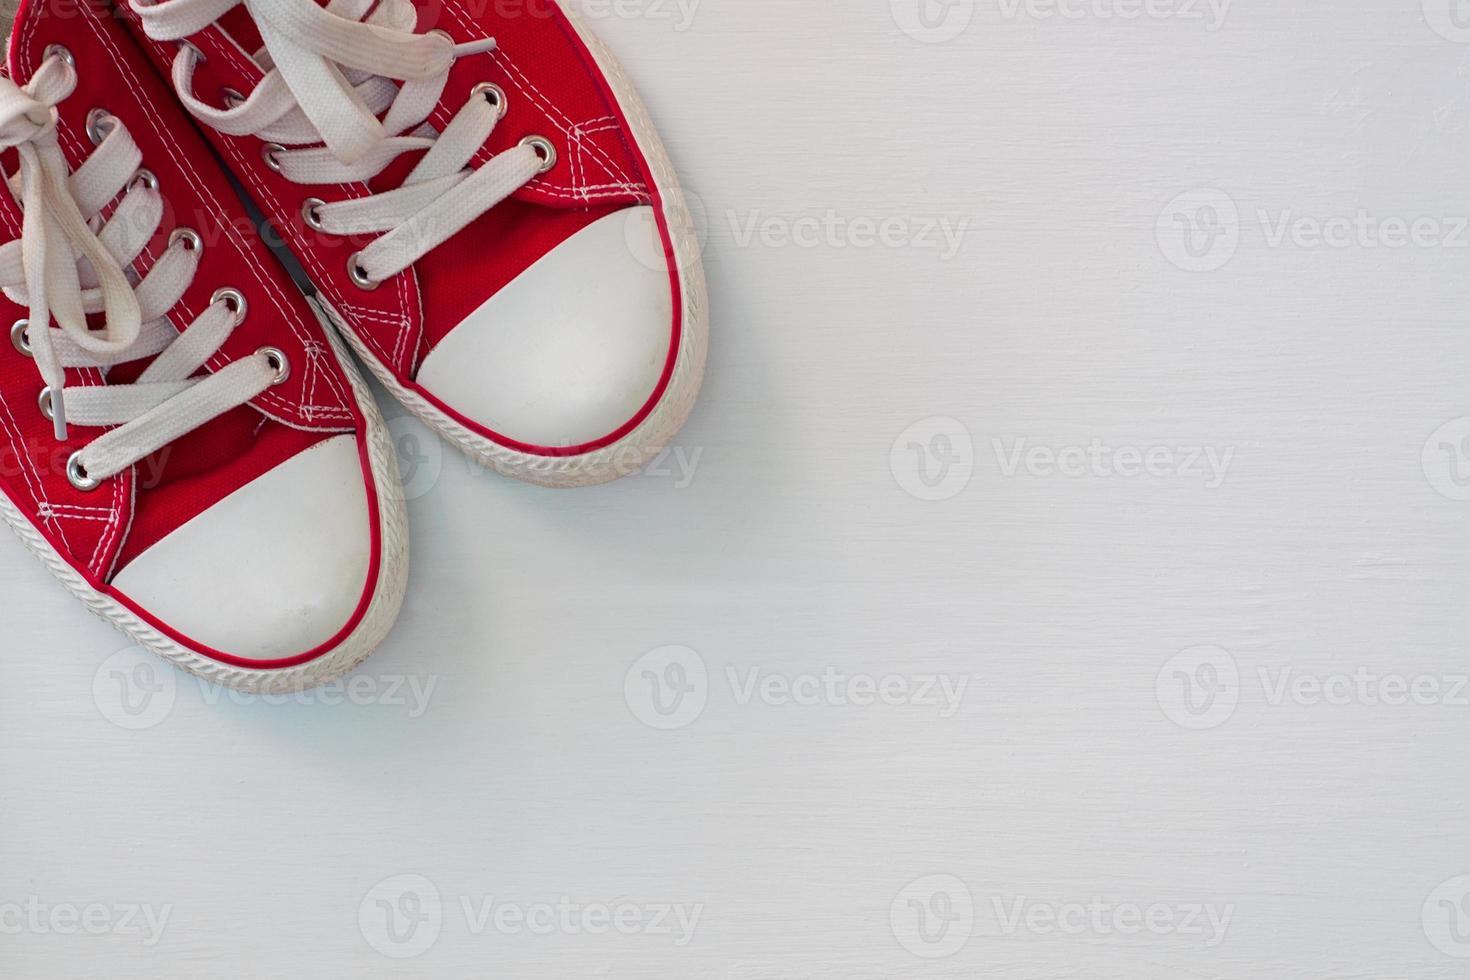 pair of red sneakers youth on a white wooden surface photo